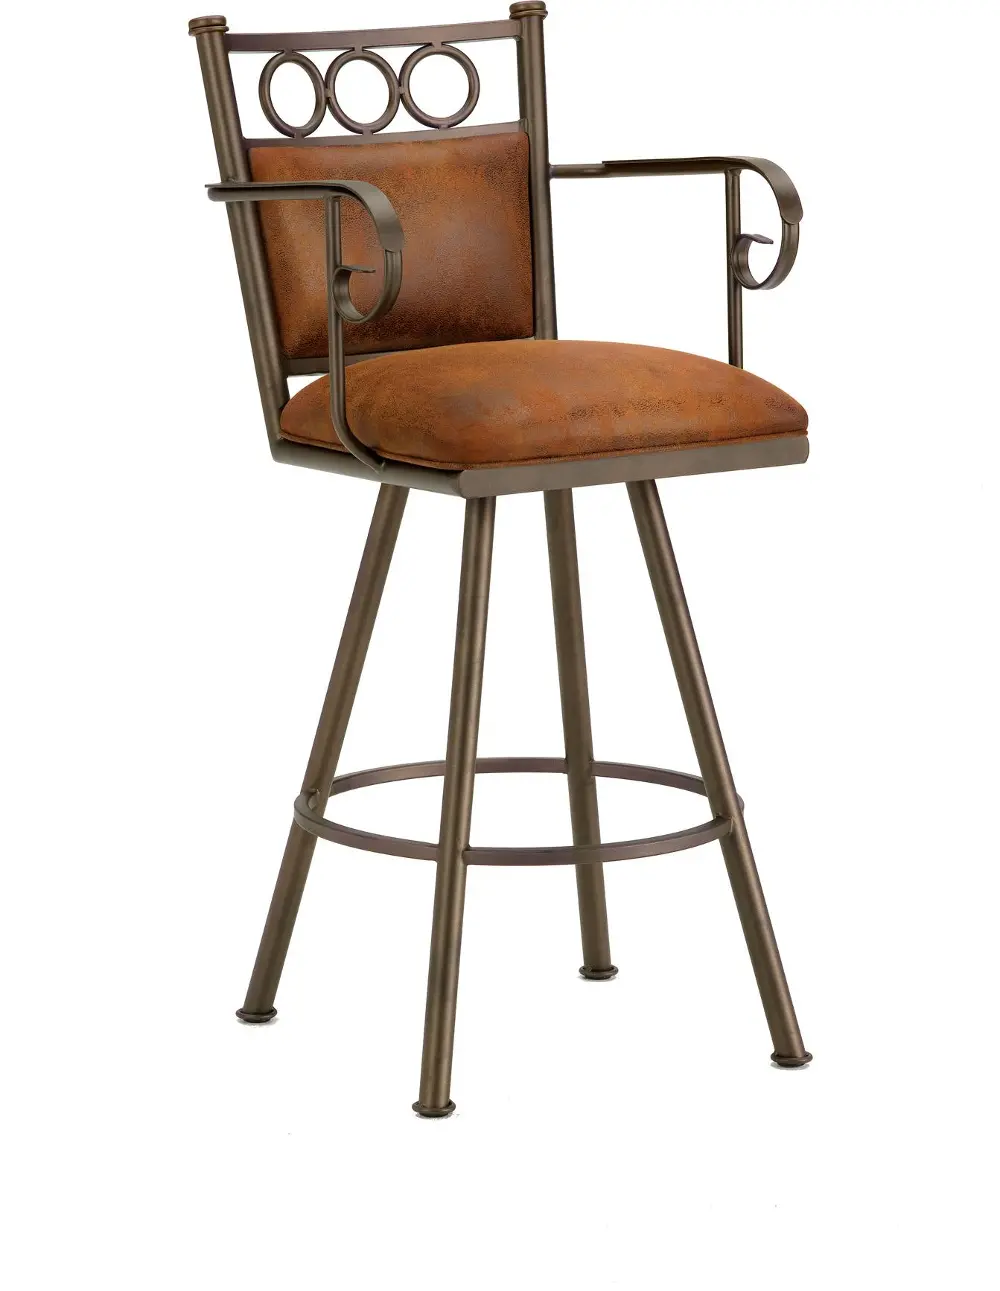 Bronze and Brown Metal Swivel Bar Stool with Arms - Waterson-1